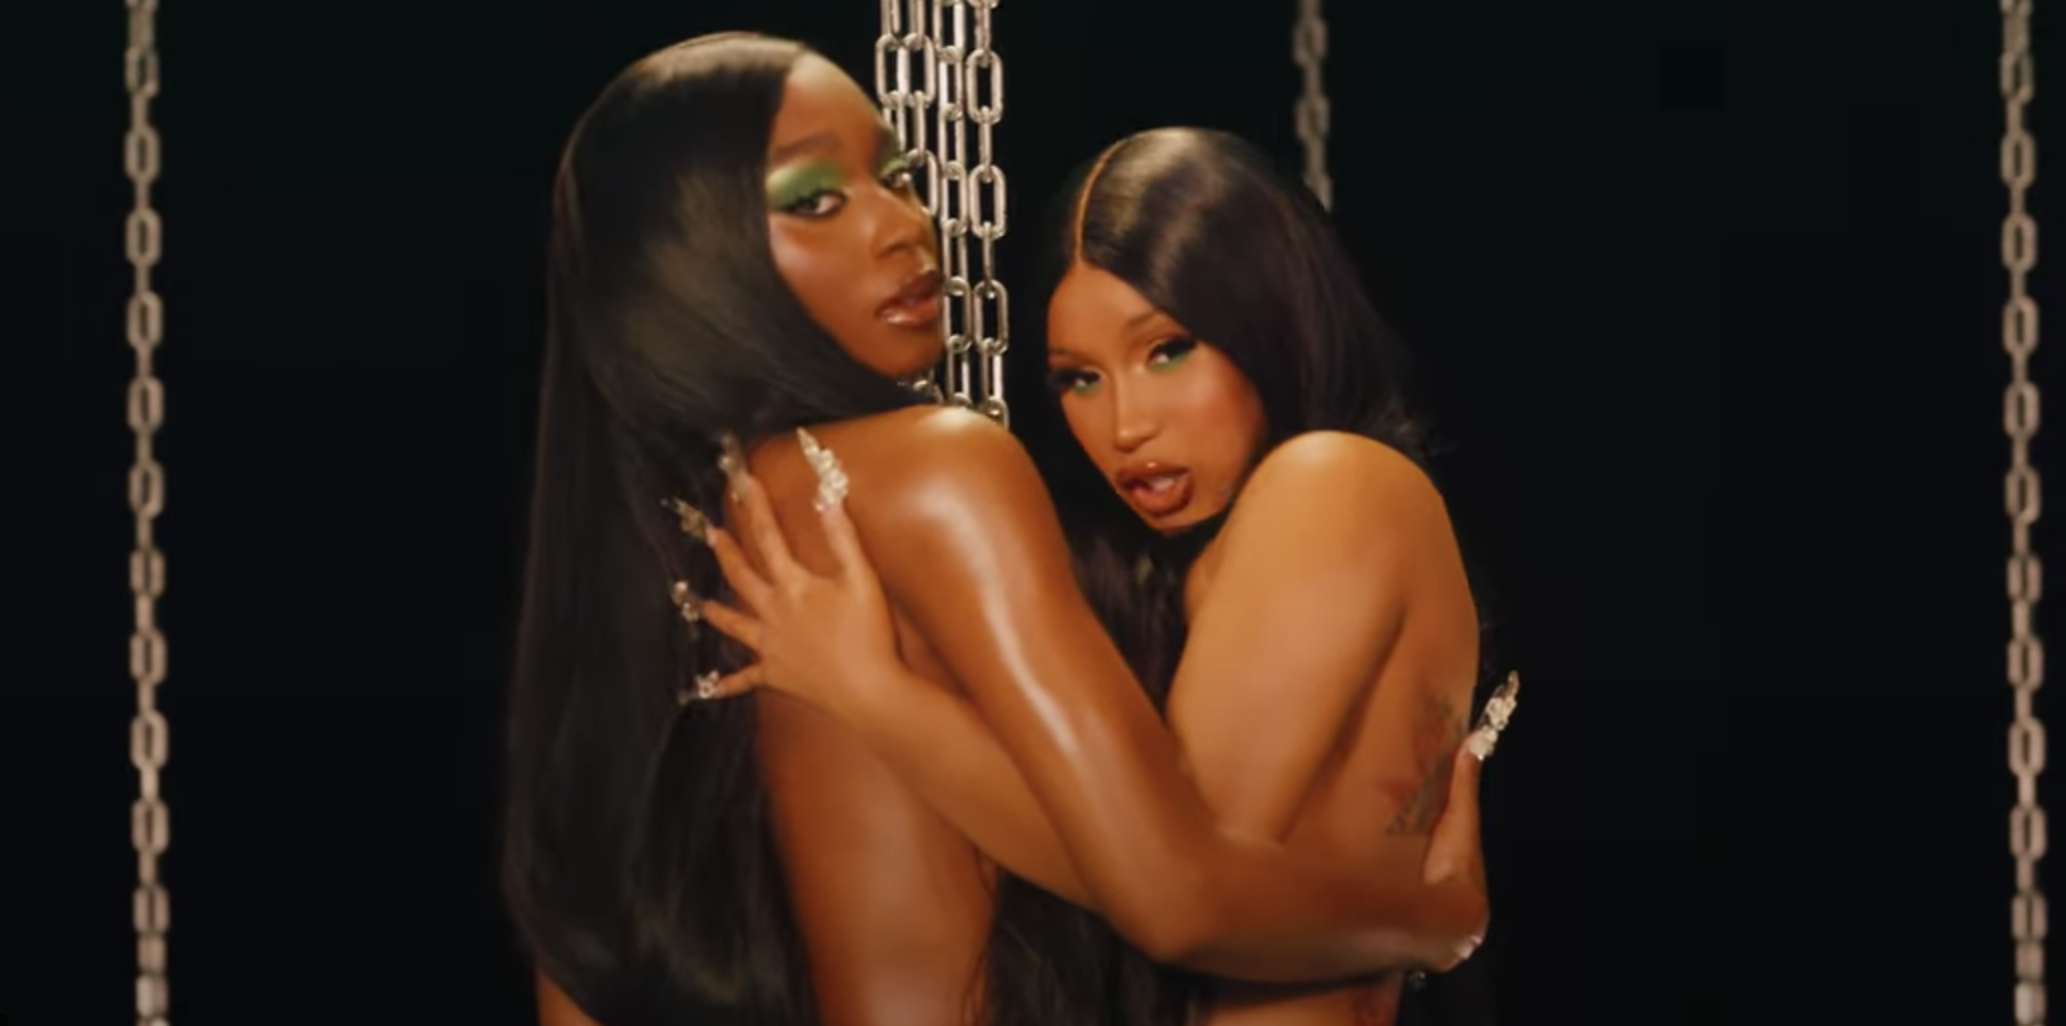 Normani Says Cardi B “Provided a Safe Space” for Her While Collaborating on “Wild Side”